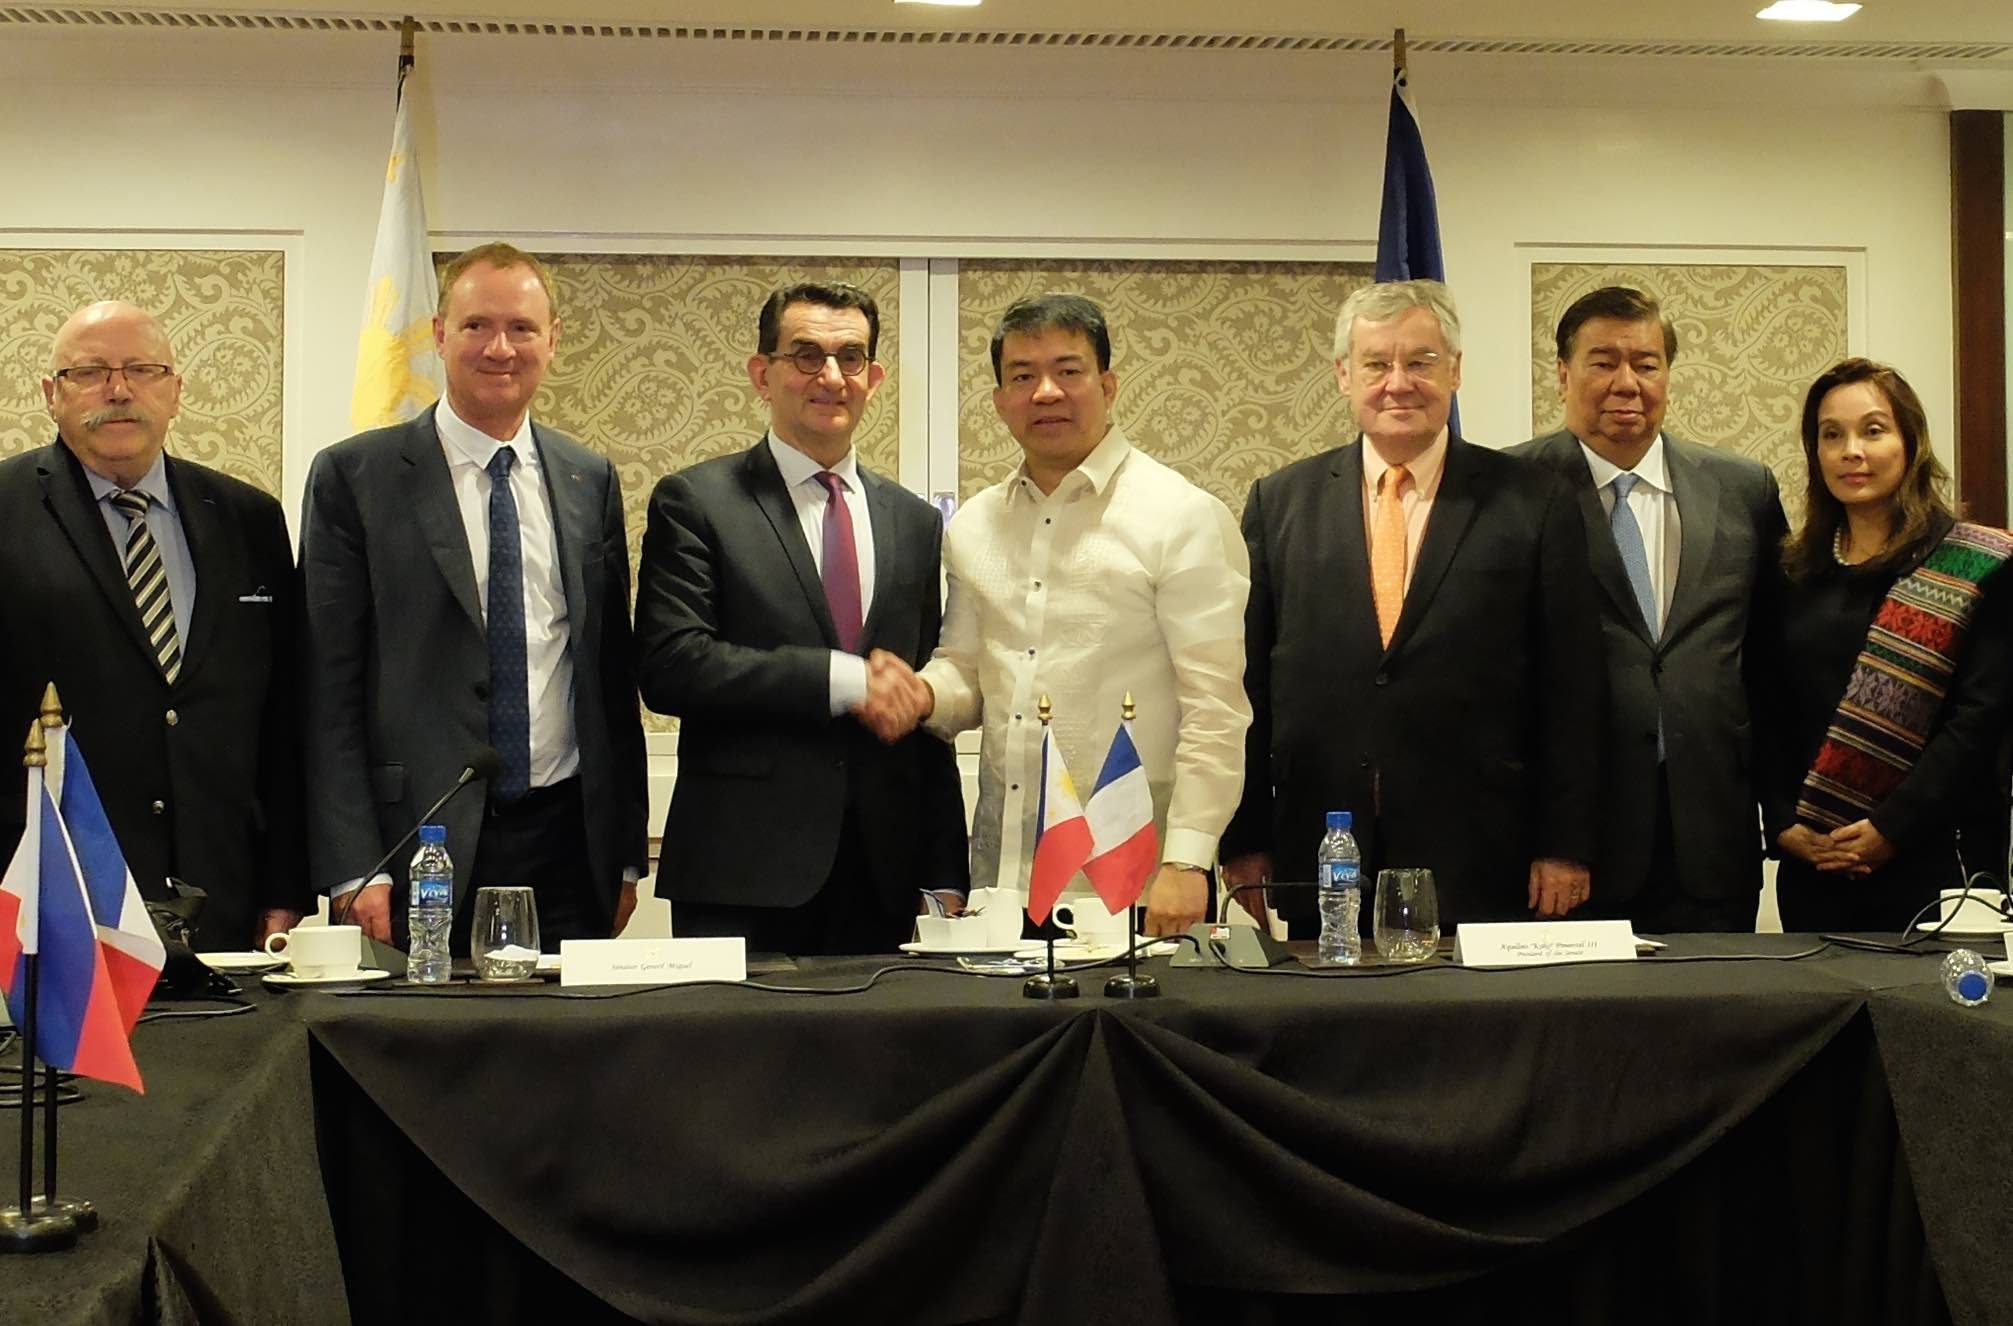 Pimentel, 8 other senators fly to France to strengthen PH-EU ties